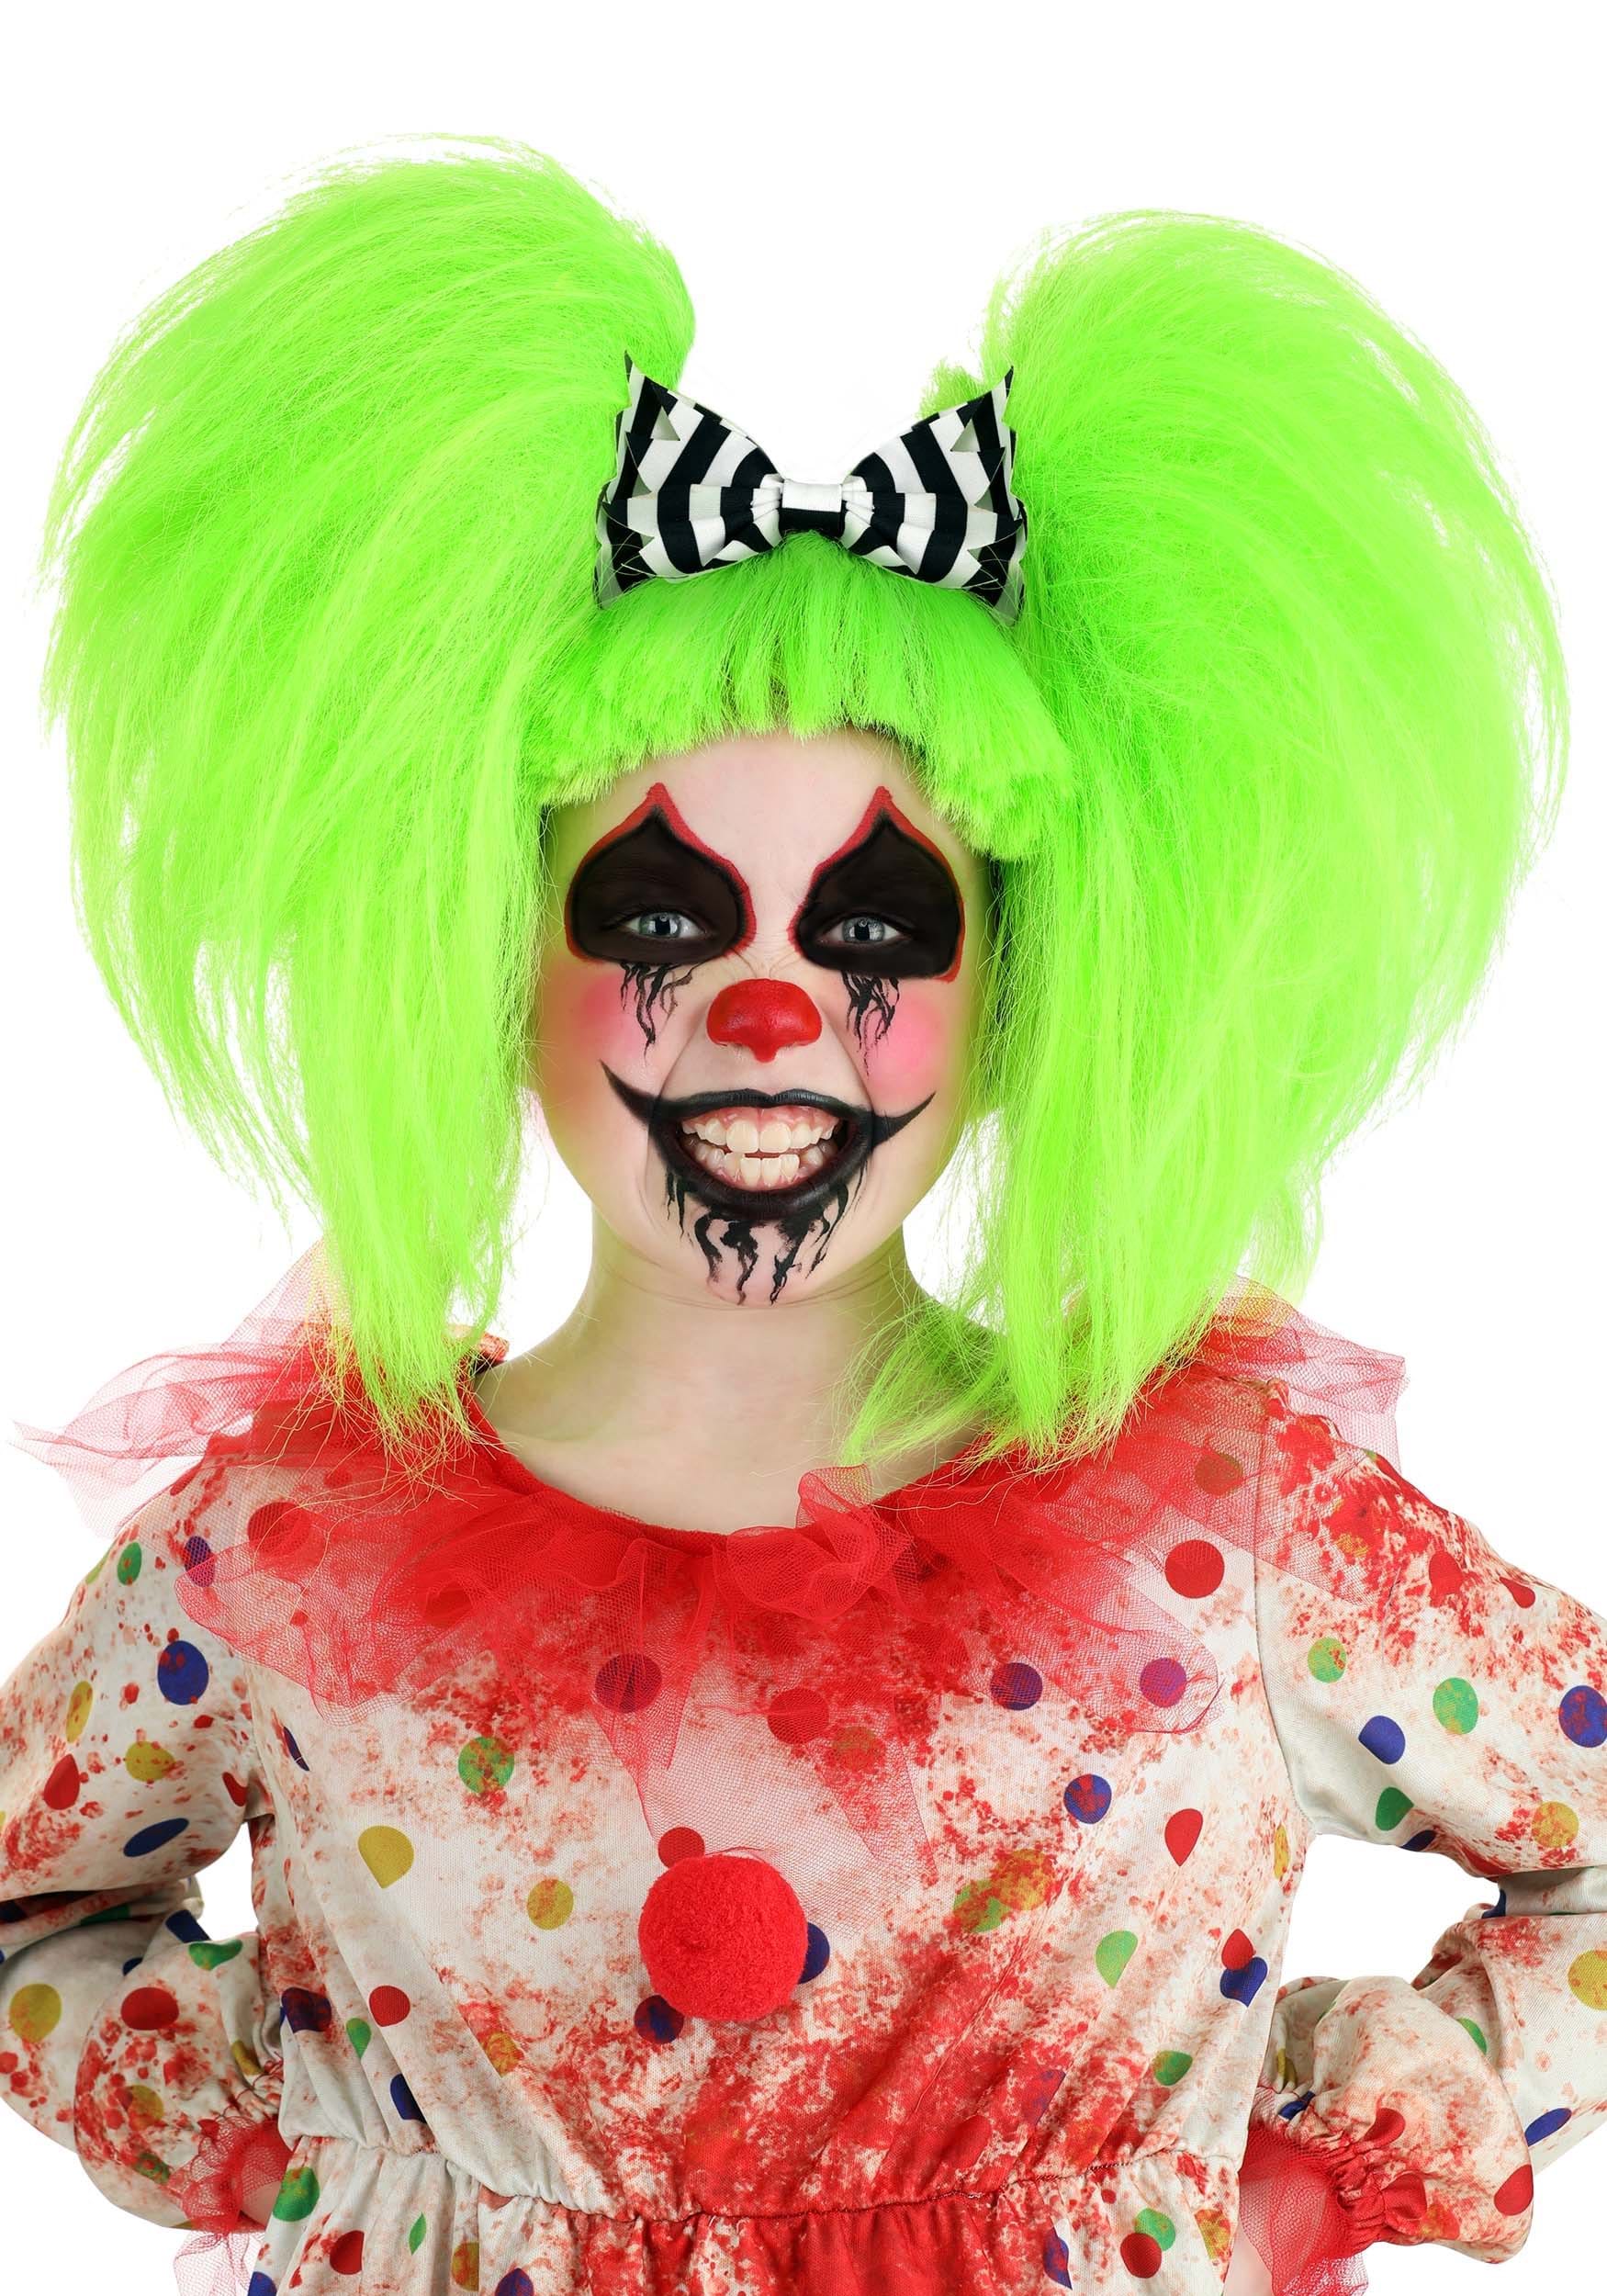 scary clown makeup for women